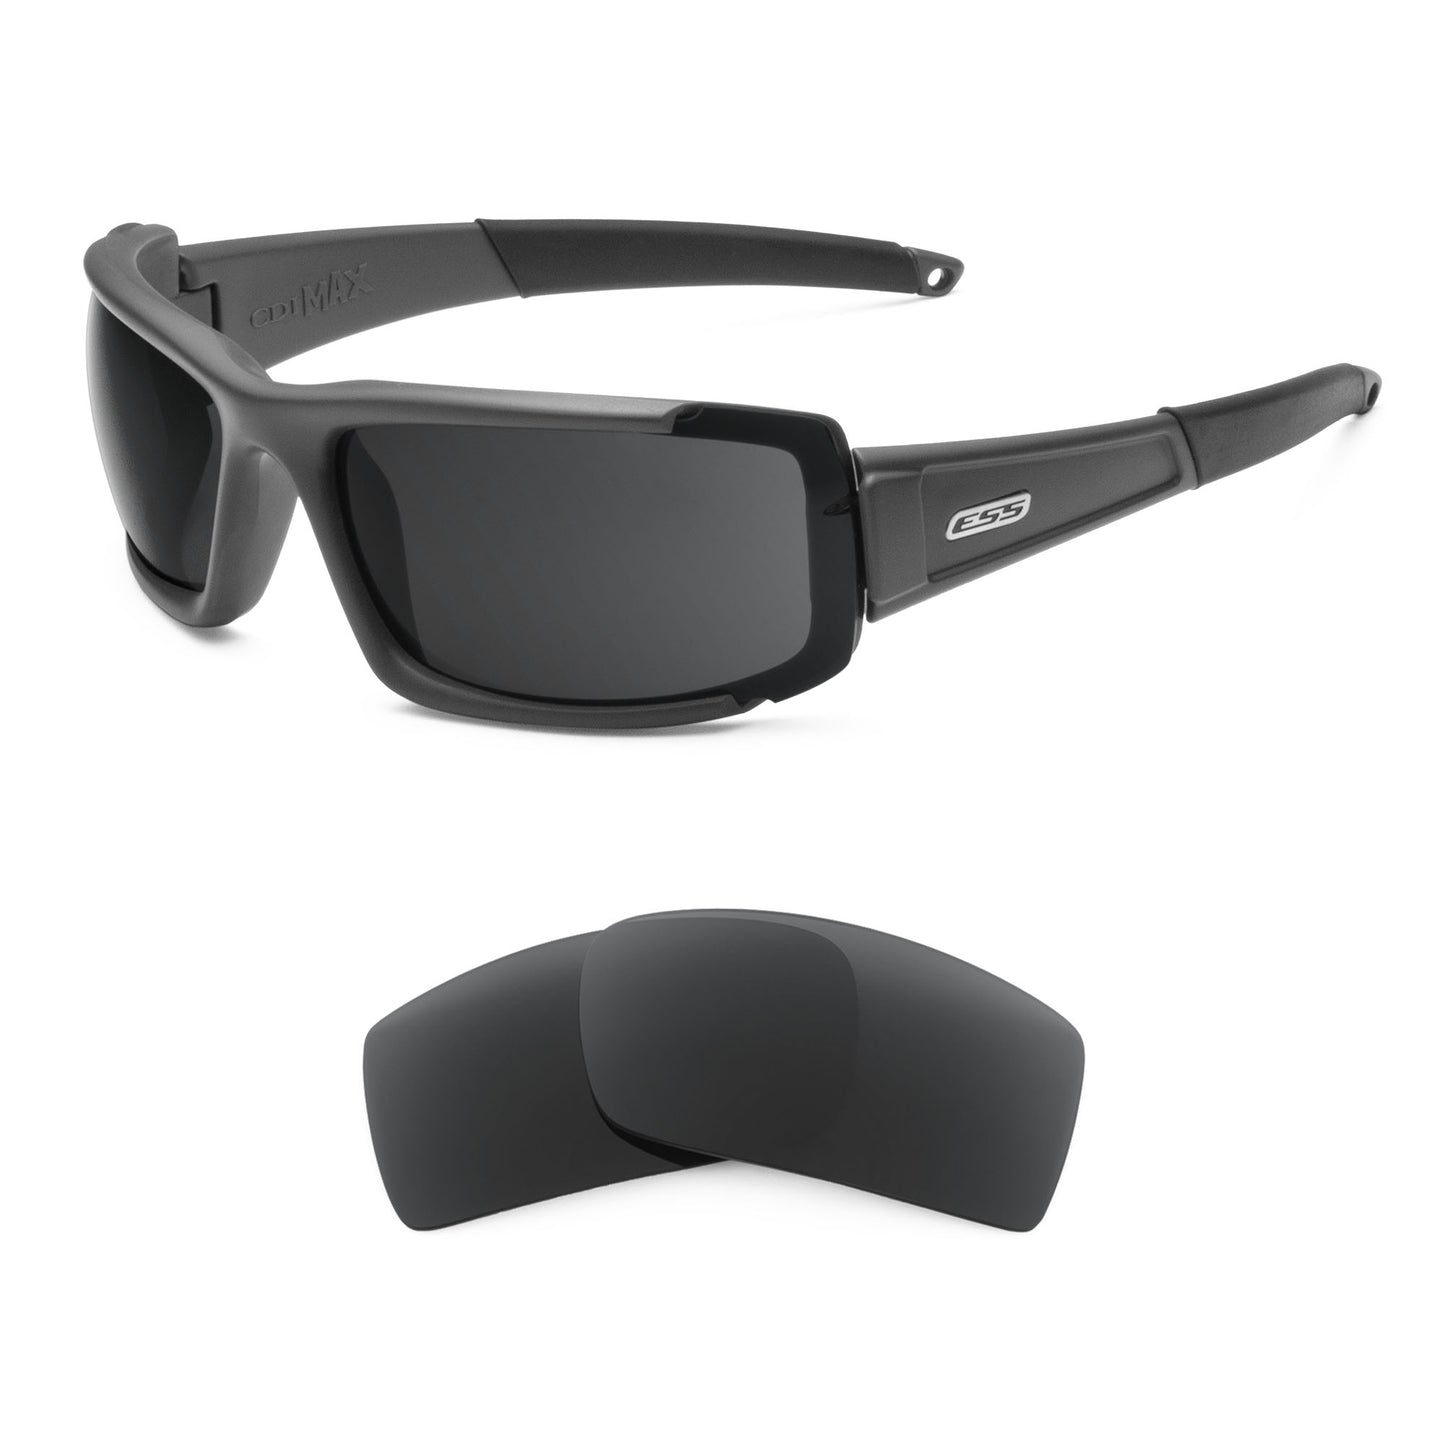 Ess CDI Max sunglasses with replacement lenses